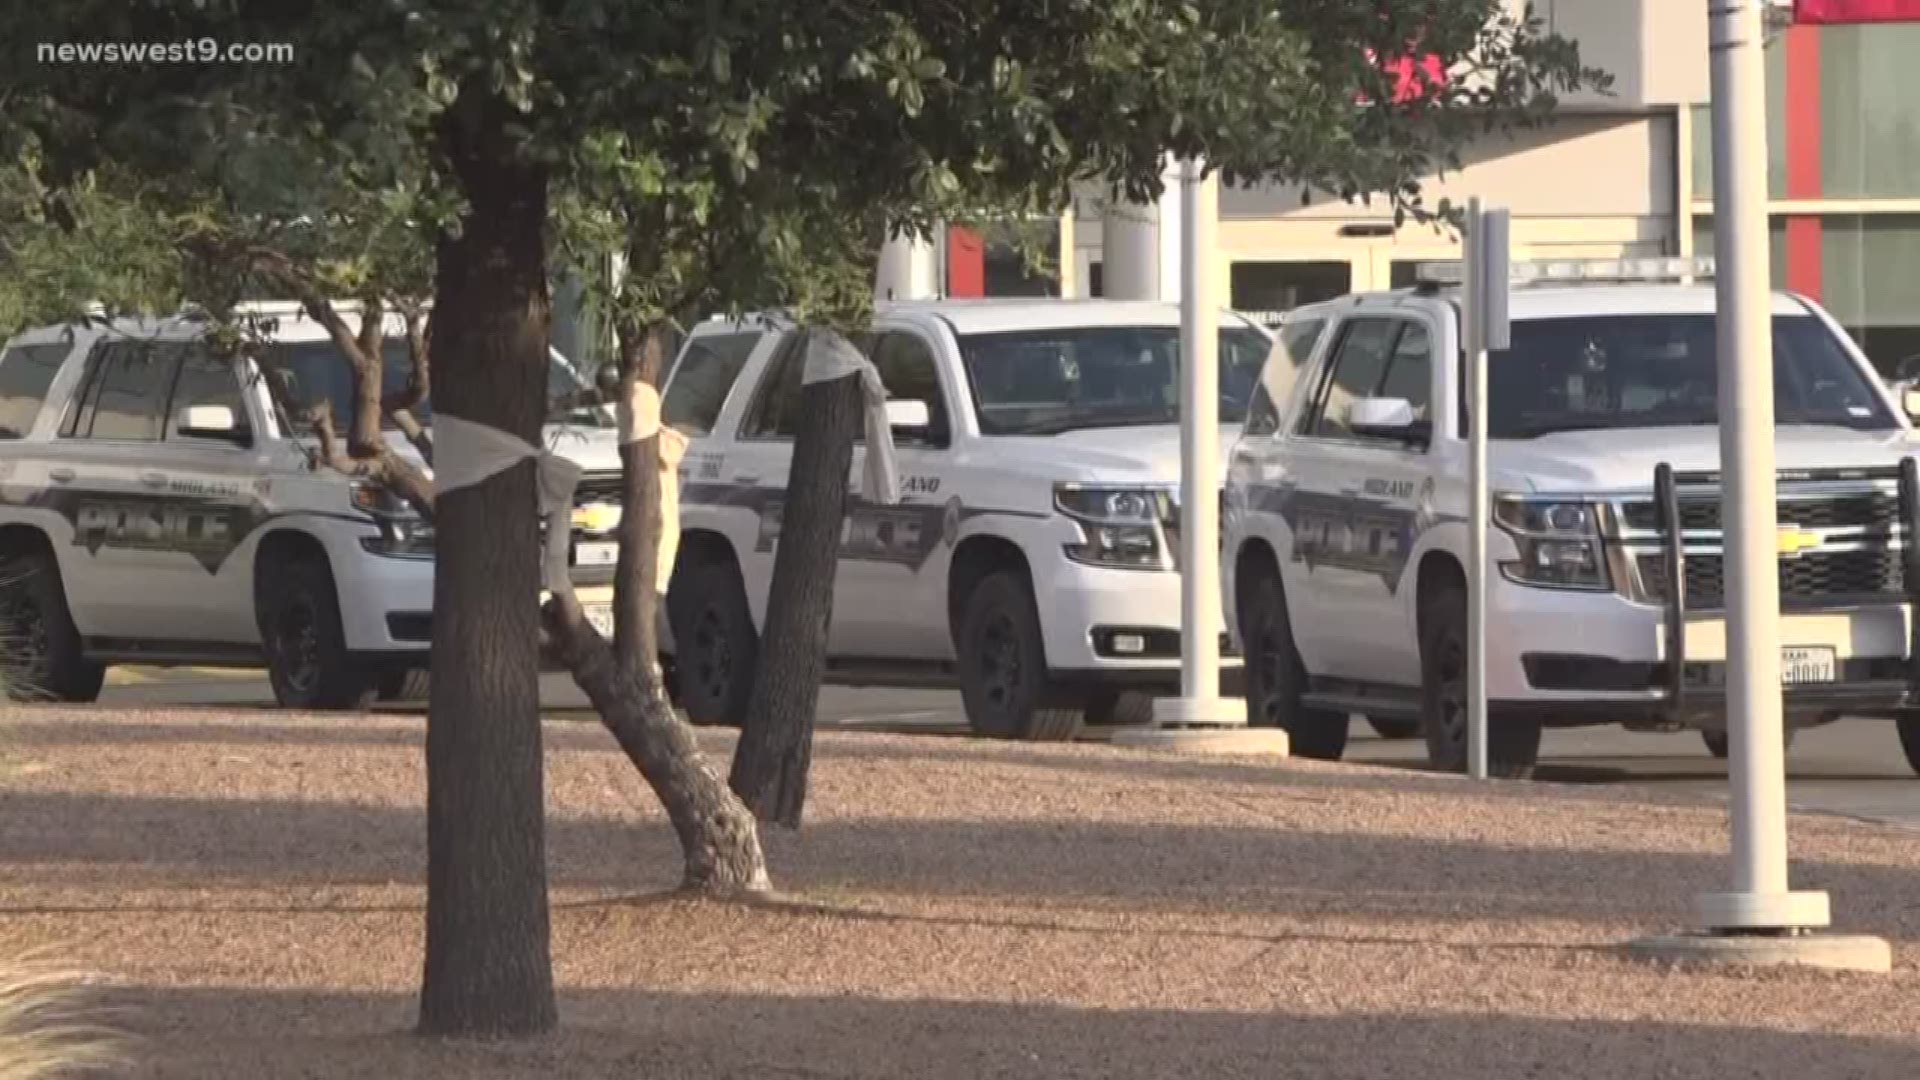 Several police cars were seen outside of Midland Memorial Hospital Wednesday night.